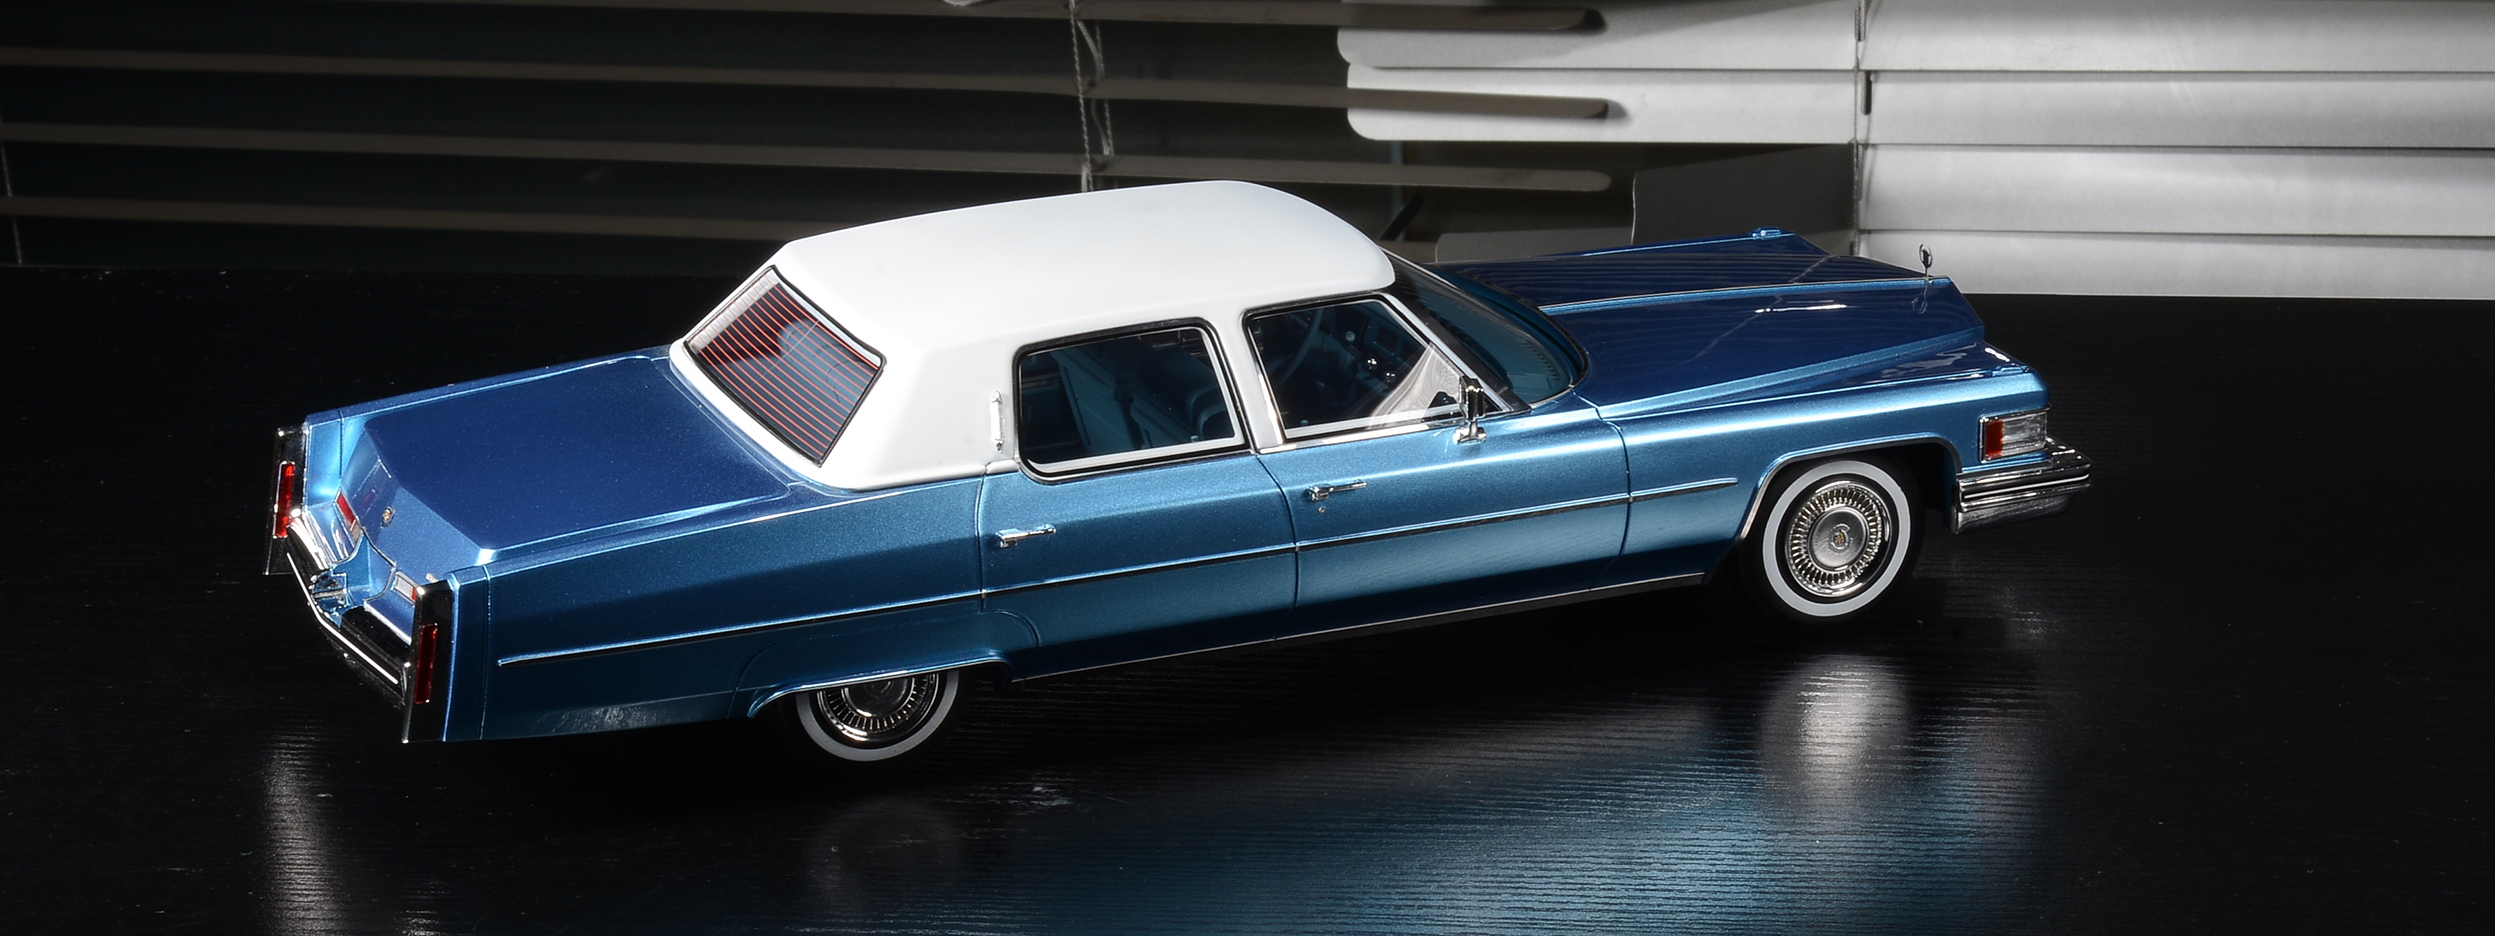 1/18 Scale 1976 Cadillac Fleetwood Sixty Special Brougham